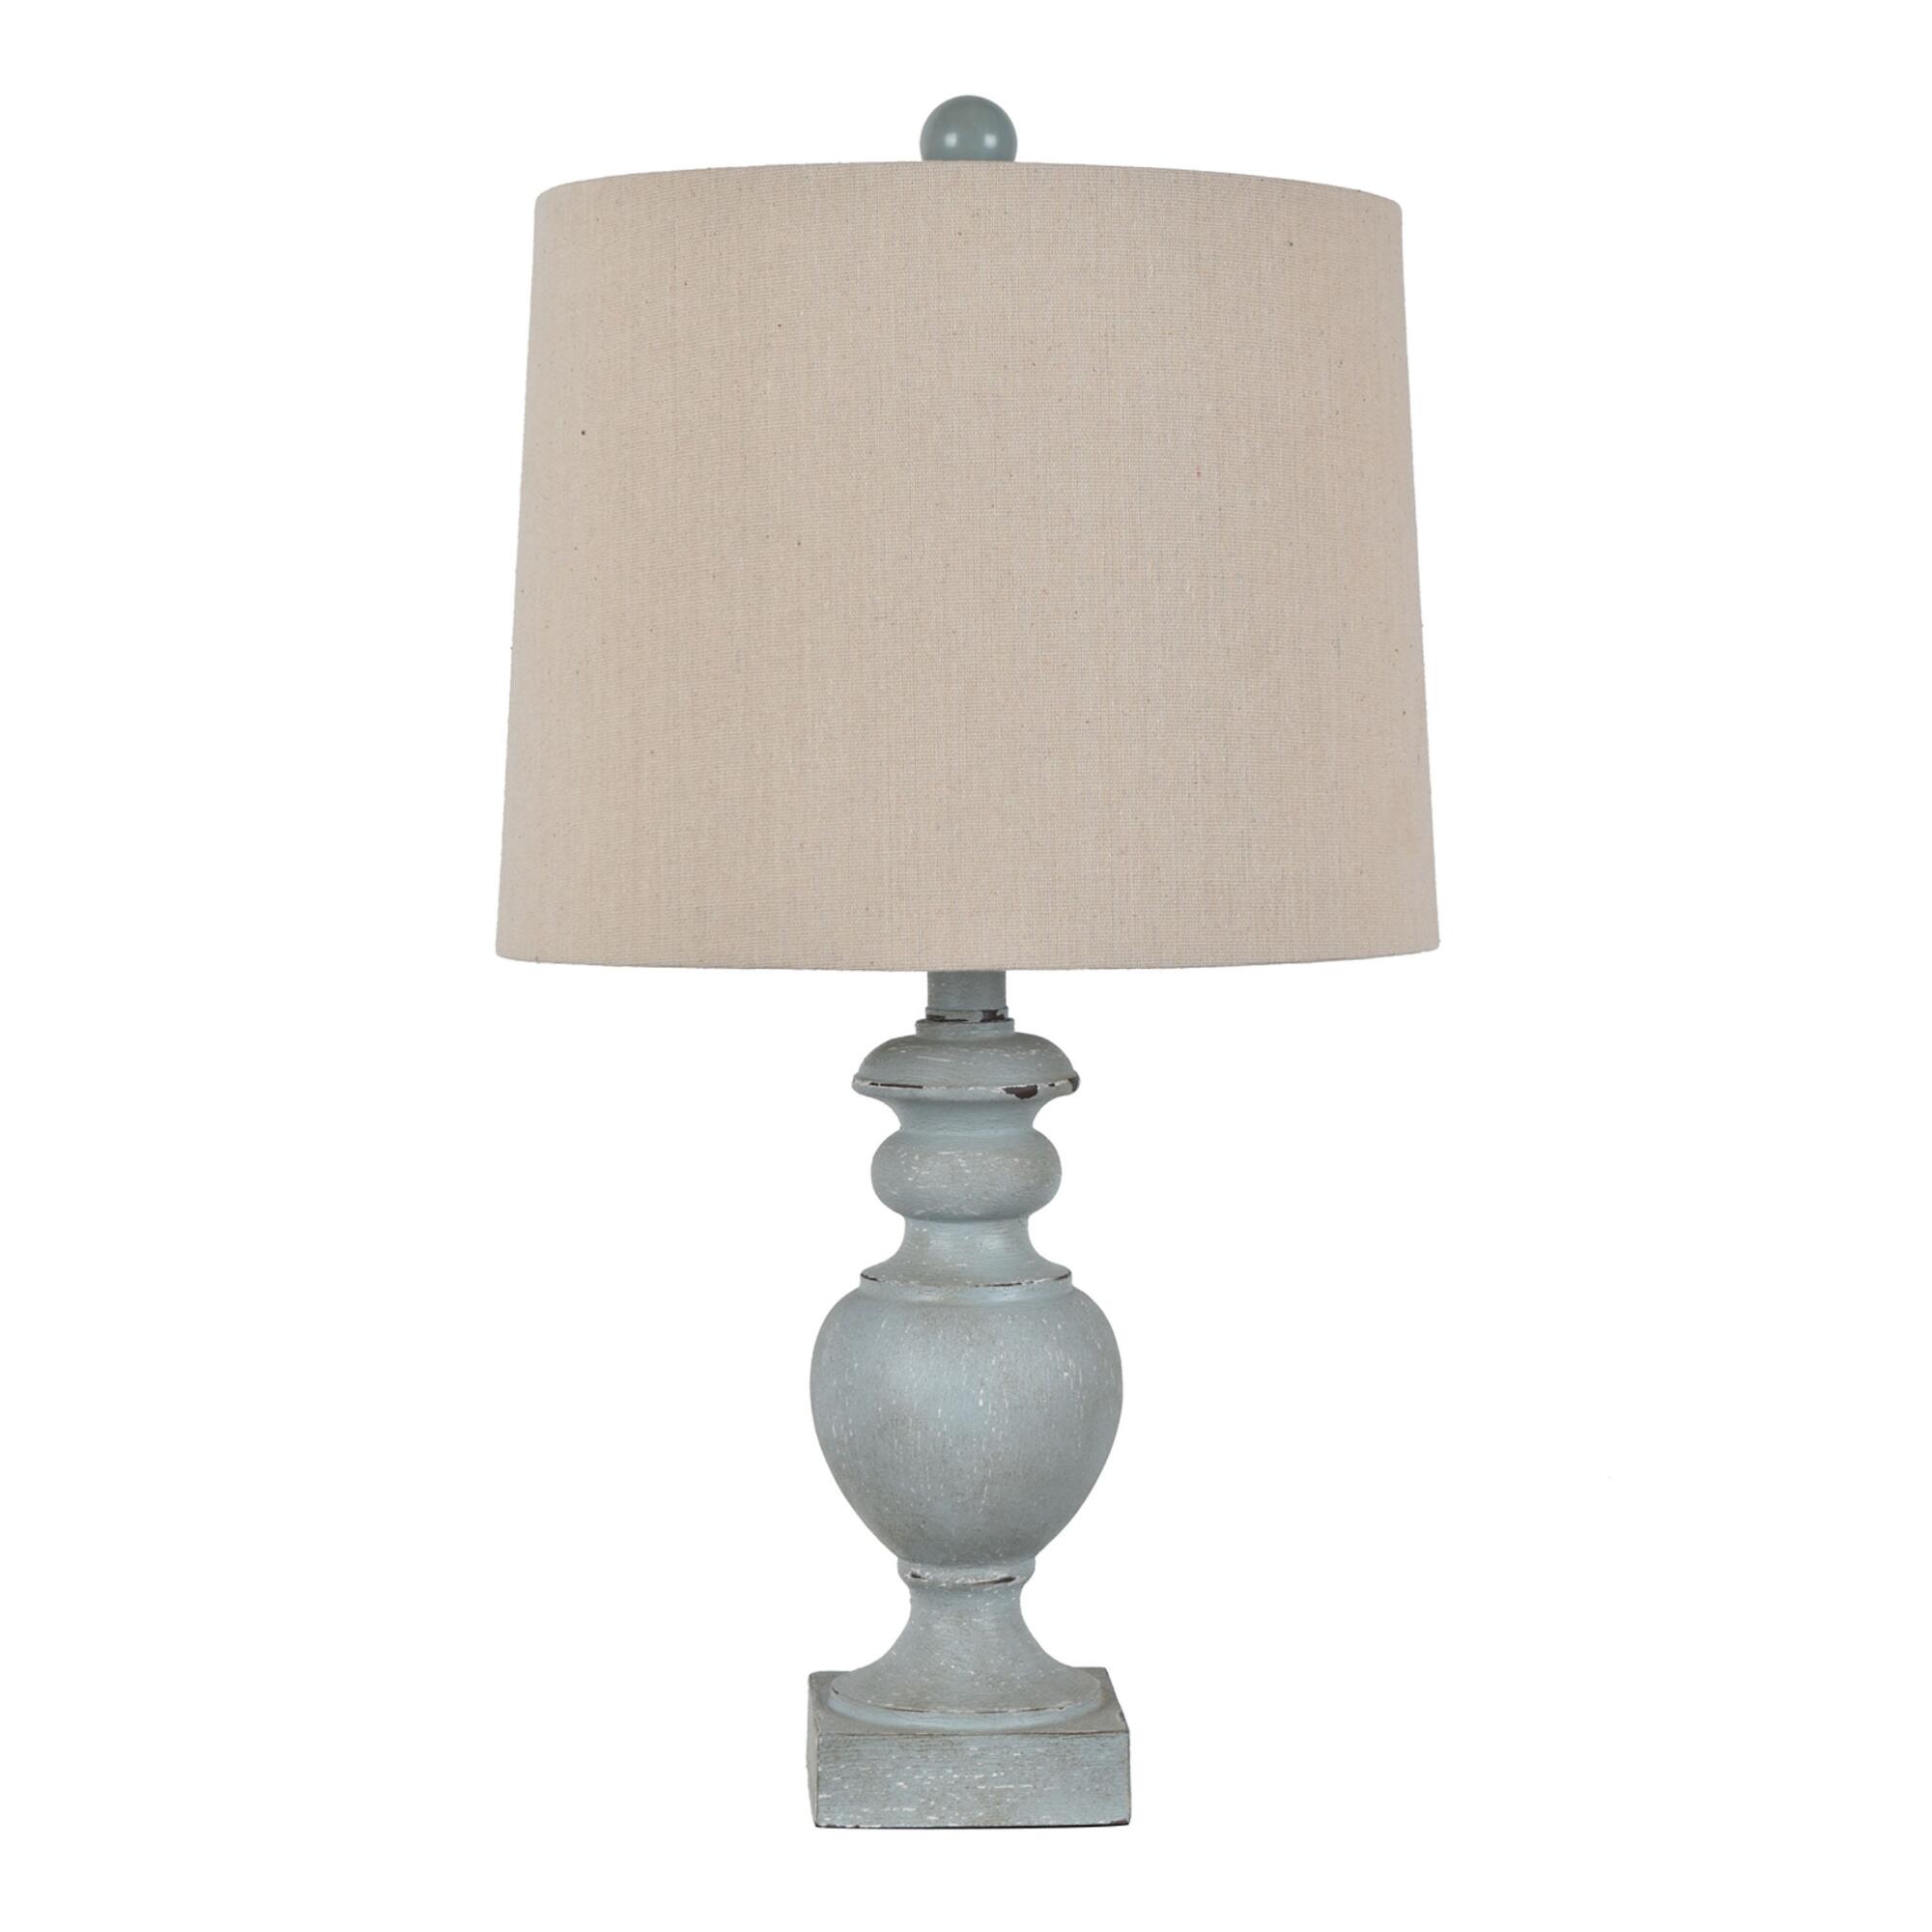 Distressed Pale Blue Elba Table Lamp by World Market